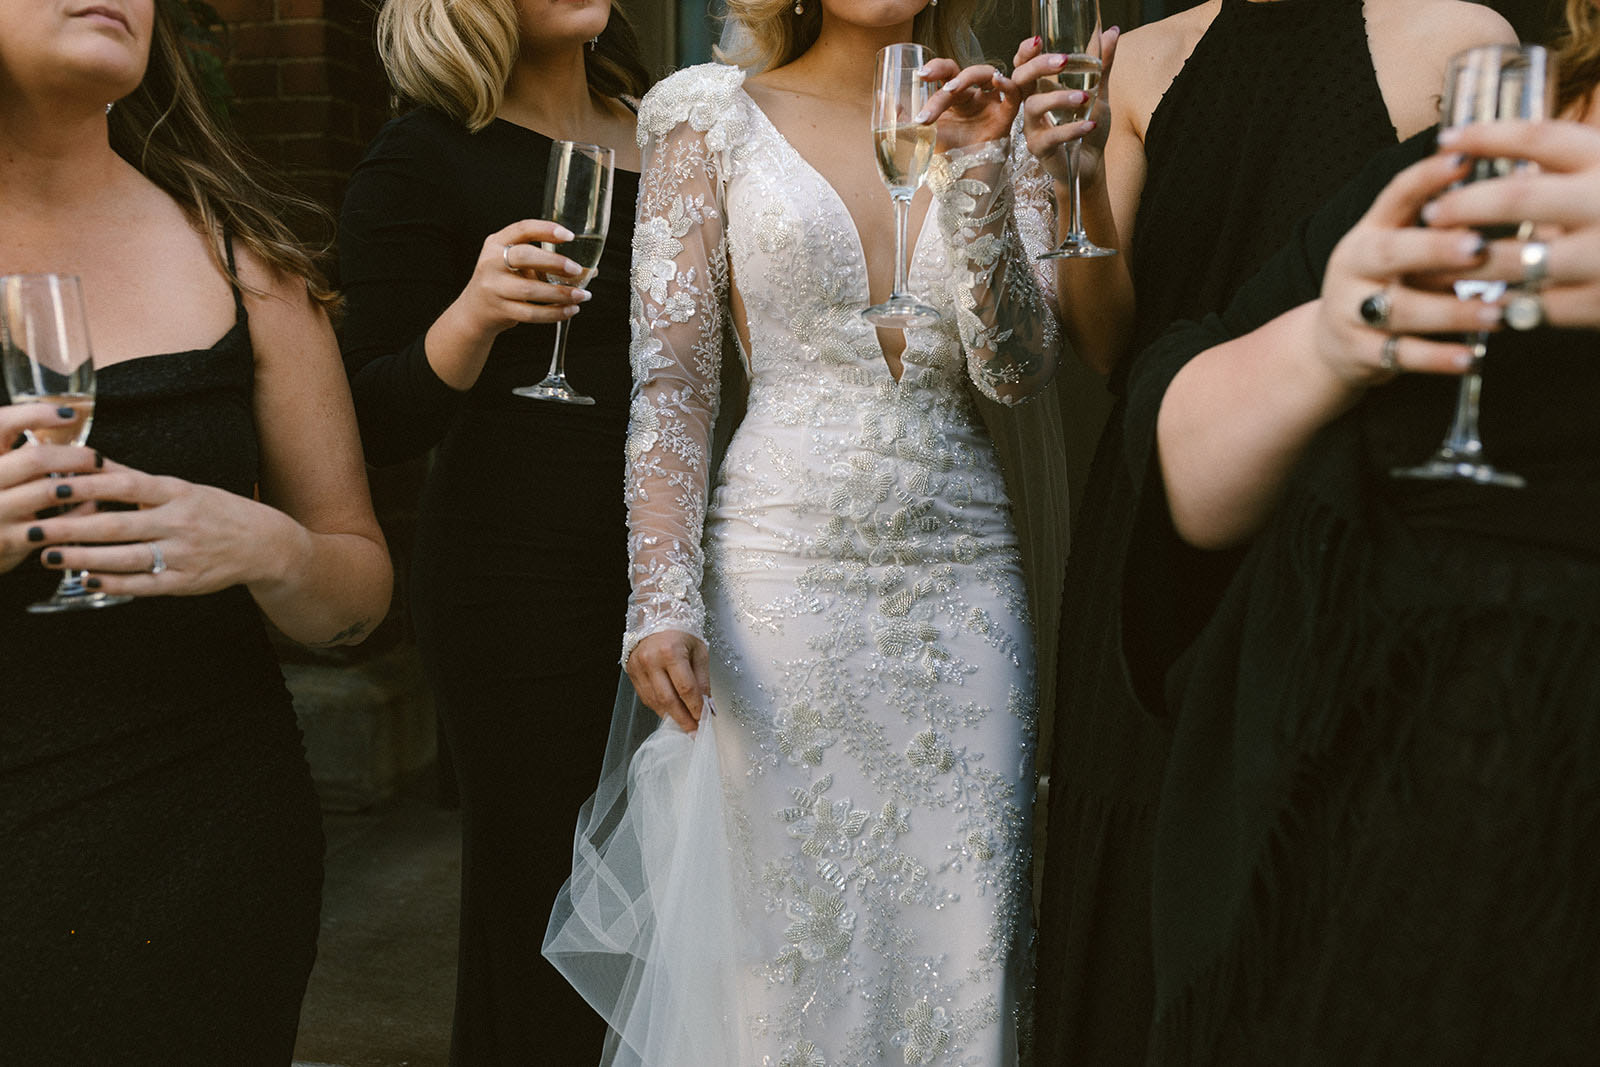 Mismatched Black Bridesmaids Dresses | Bride in Long Sleeve Lace Gown with Padded Shoulders